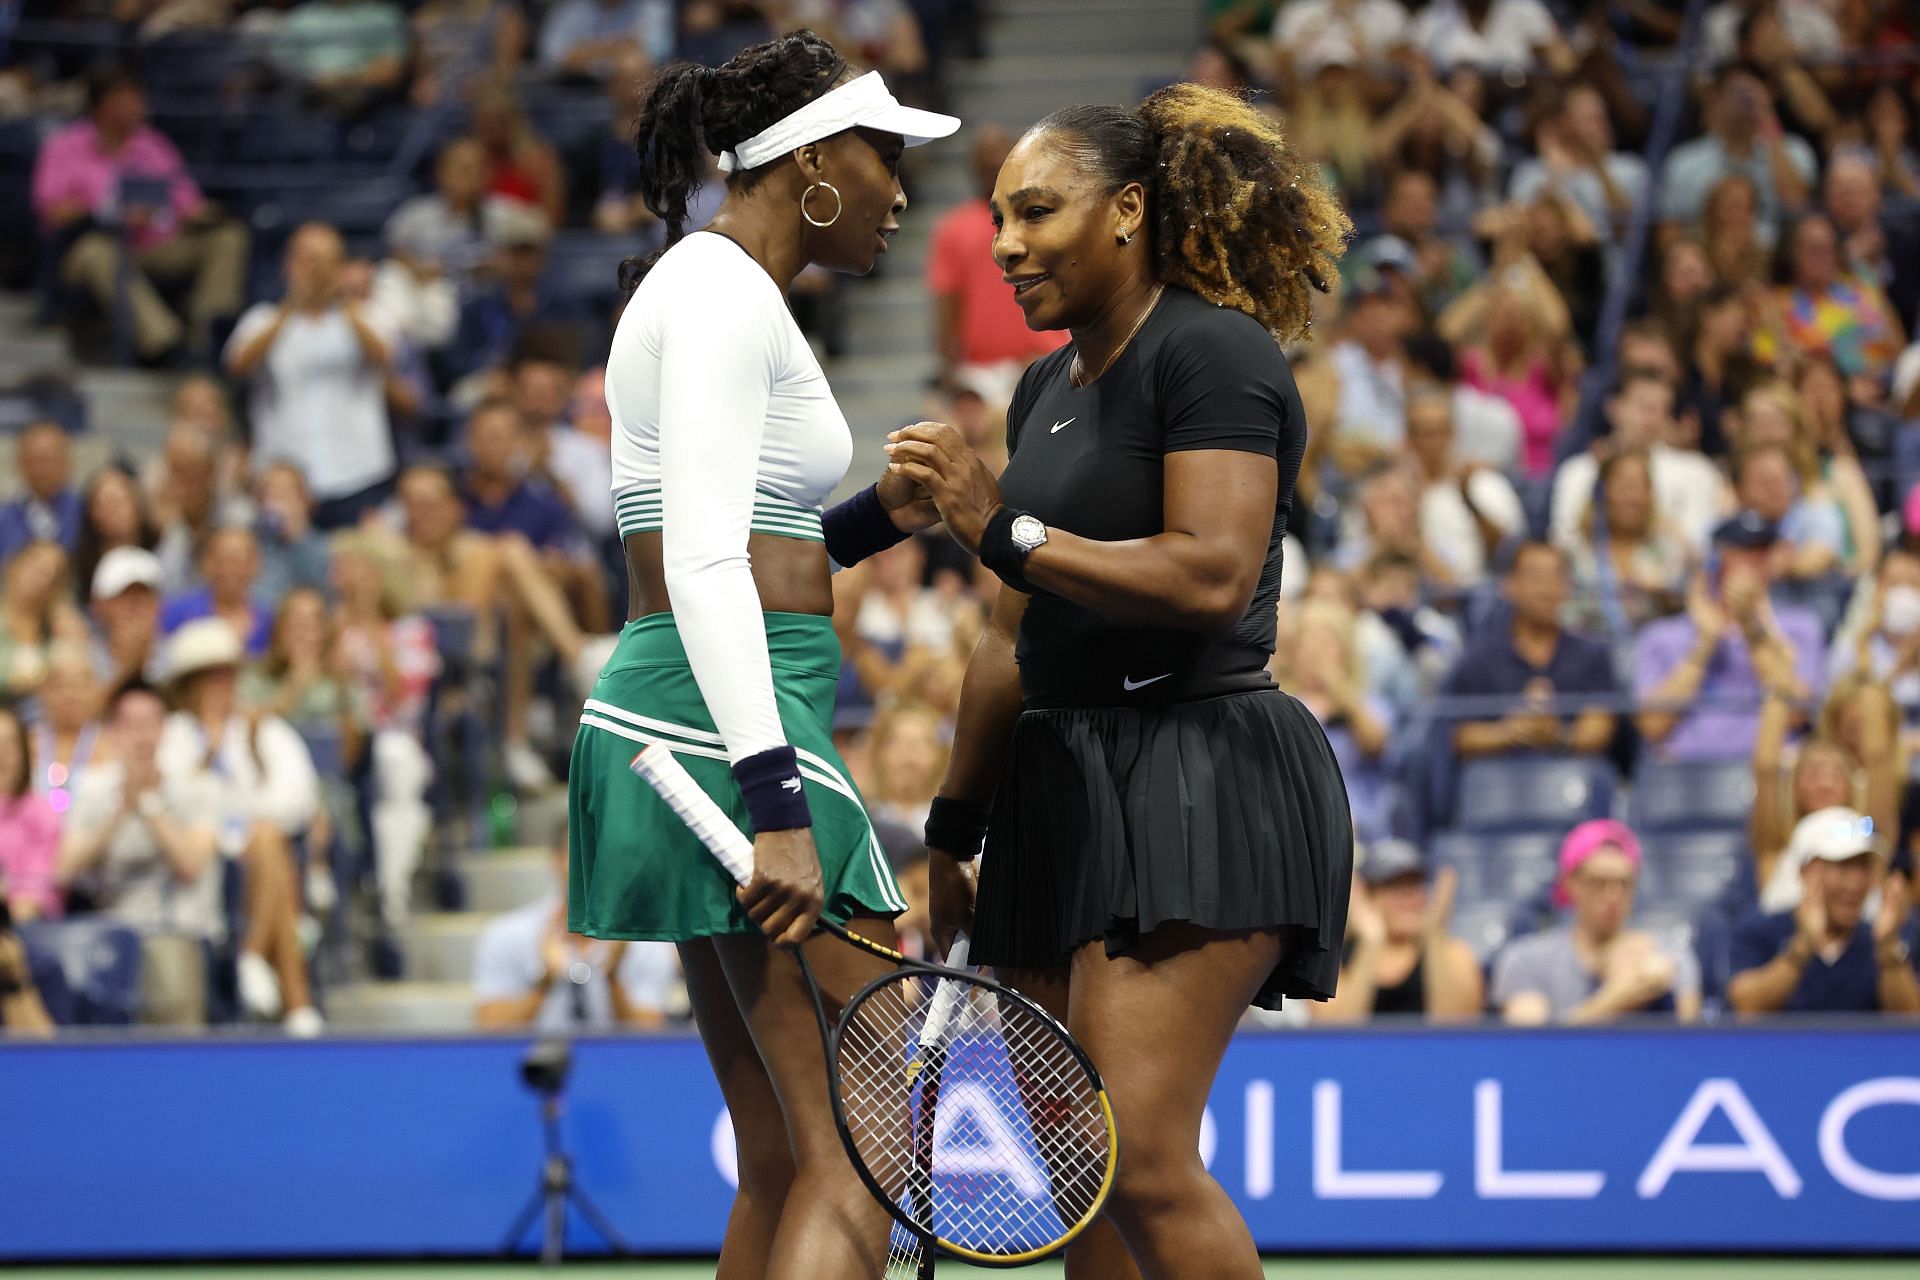 Serena and Venus Williams in action at the 2022 US Open.